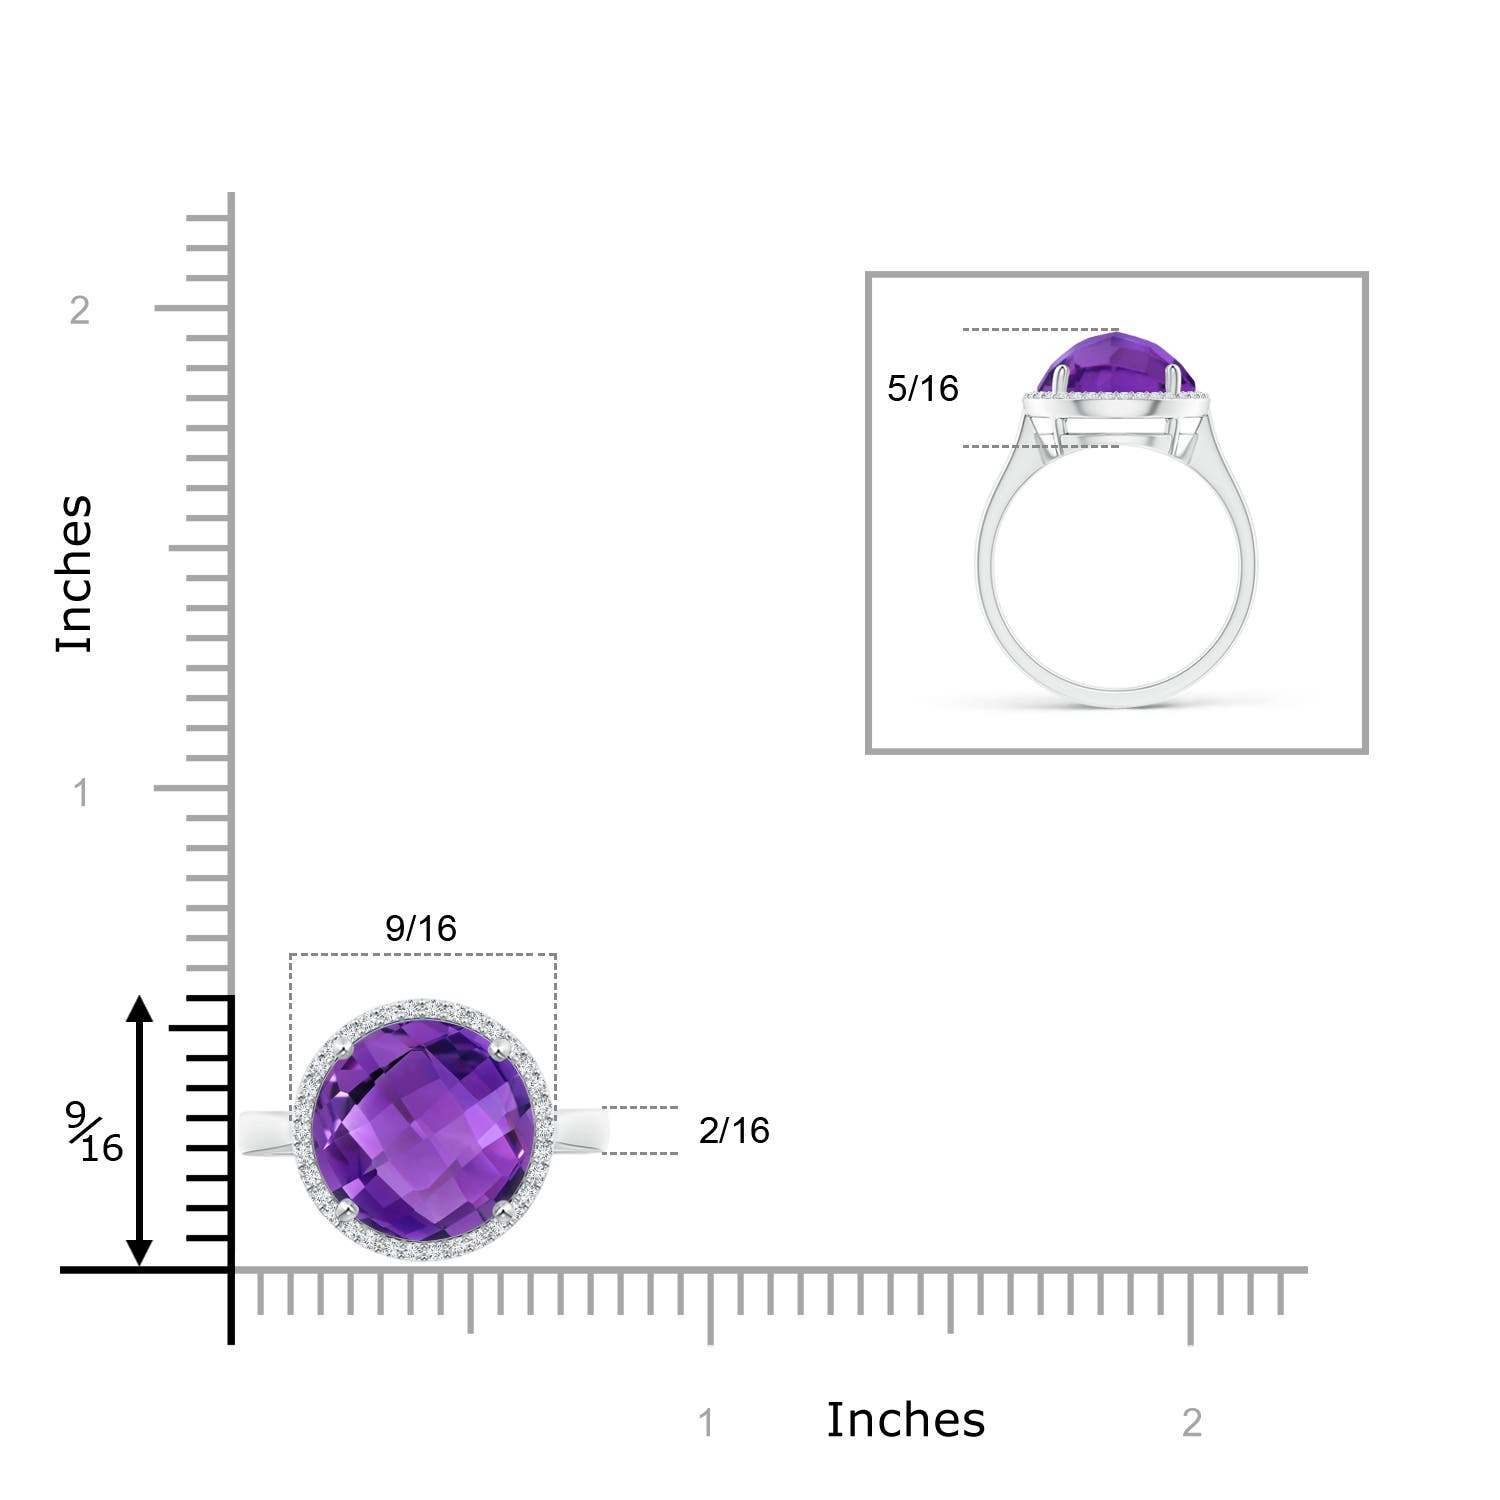 AAA - Amethyst / 5.02 CT / 14 KT White Gold